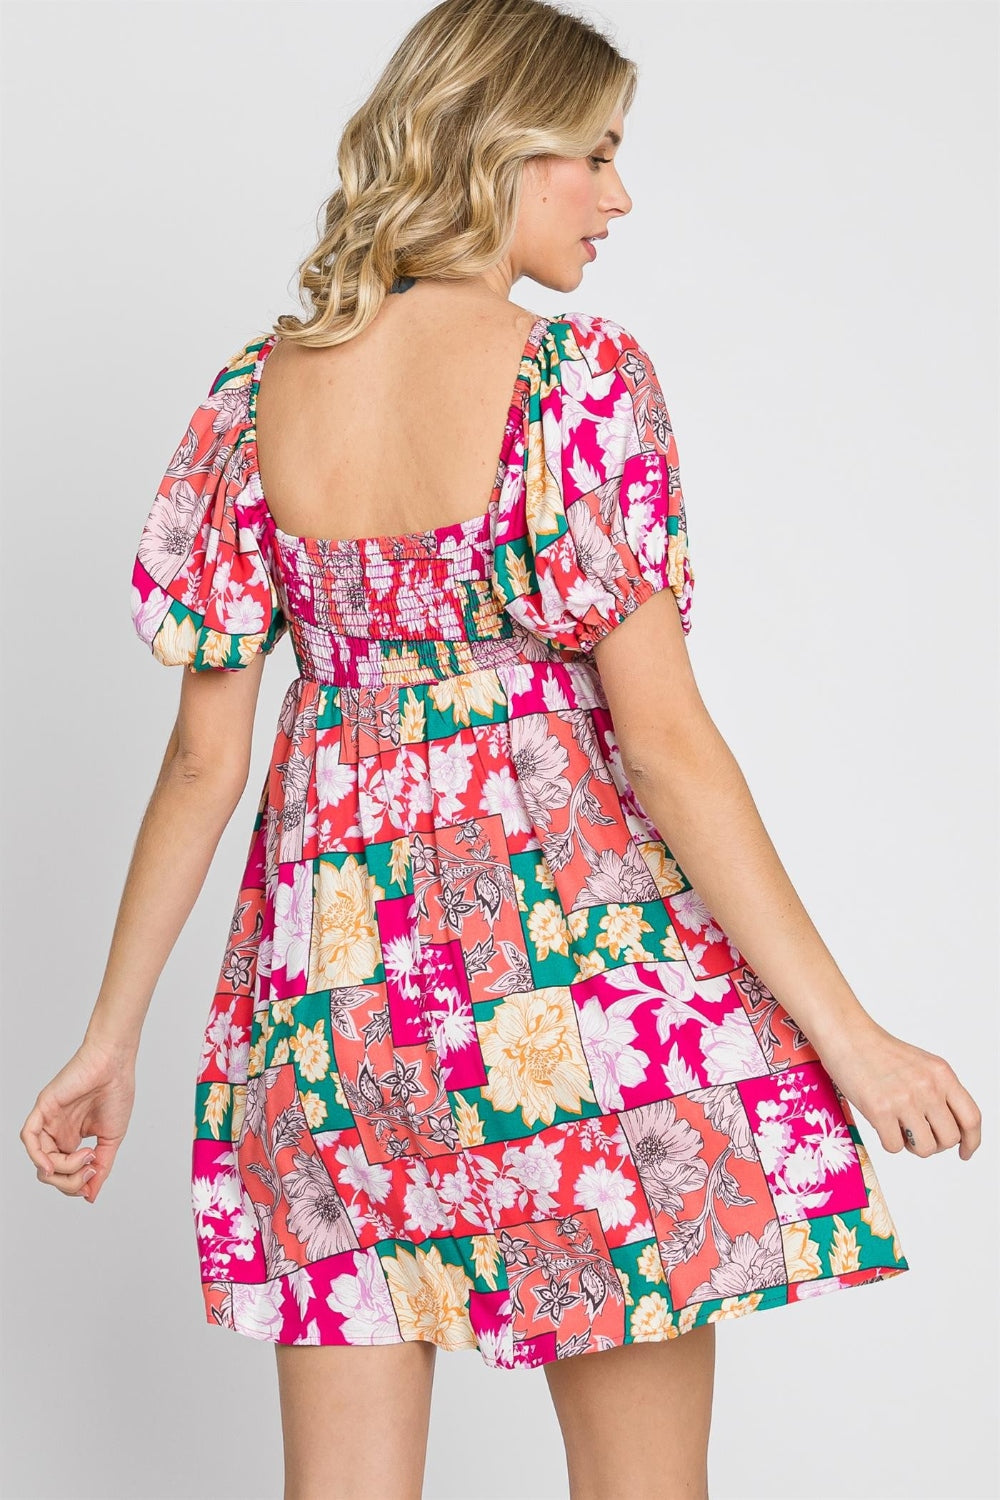 Quilted Floral Mini Dress - Cheeky Chic Boutique